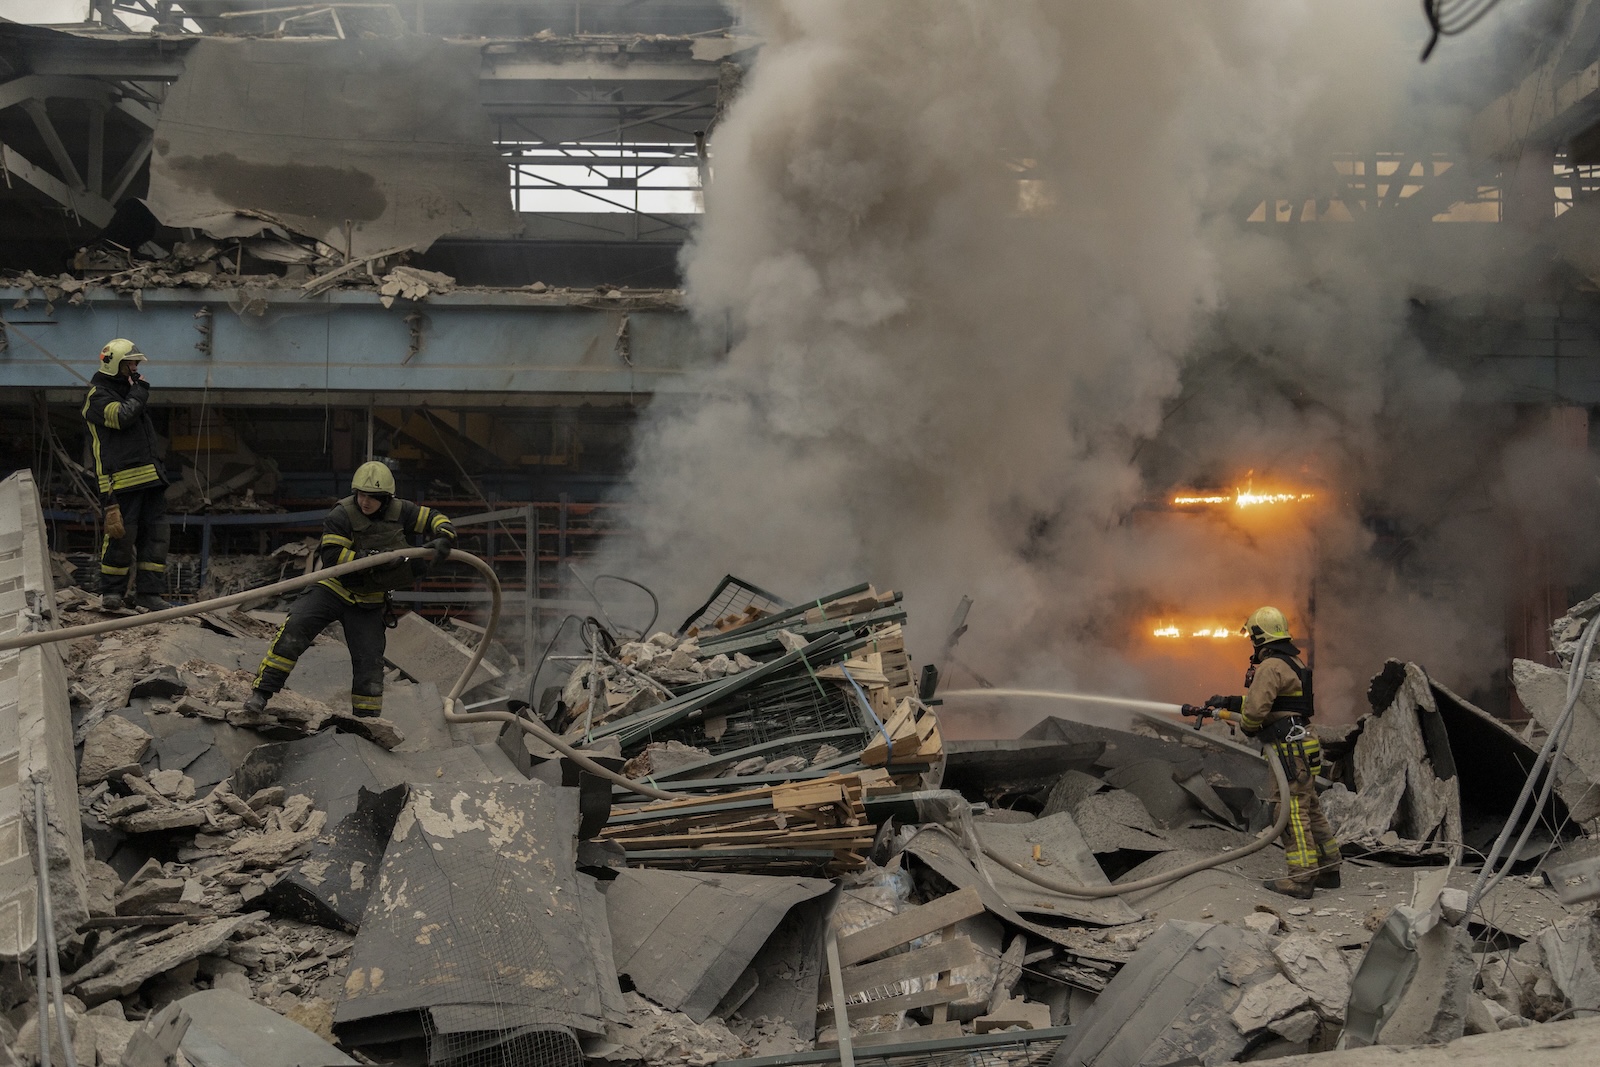 epa11047934 Ukrainian rescuers work at the site of a rocket attack on a civilian factory in Kharkiv, northeastern Ukraine, 29 December 2023, amid the Russian invasion. At least 16 people have died and dozens more injured after Russia launched a wave of airstrikes across Ukraine, Ukrainian authorities said on 29 December. Strikes were reported in Kyiv, Lviv, Odesa, Dnipro, Kharkiv, Zaporizhzhia, and other Ukrainian cities. Russia launched 'more than 150 missiles and combat drones' at Ukrainian cities, Ukraine's Prosecutor General Andriy Kostin said in a statement, adding that extensive damage included residential buildings, educational institutions and hospitals. Russian troops entered Ukraine on 24 February 2022 starting a conflict that has provoked destruction and a humanitarian crisis.  EPA/YAKIV LIASHENKO